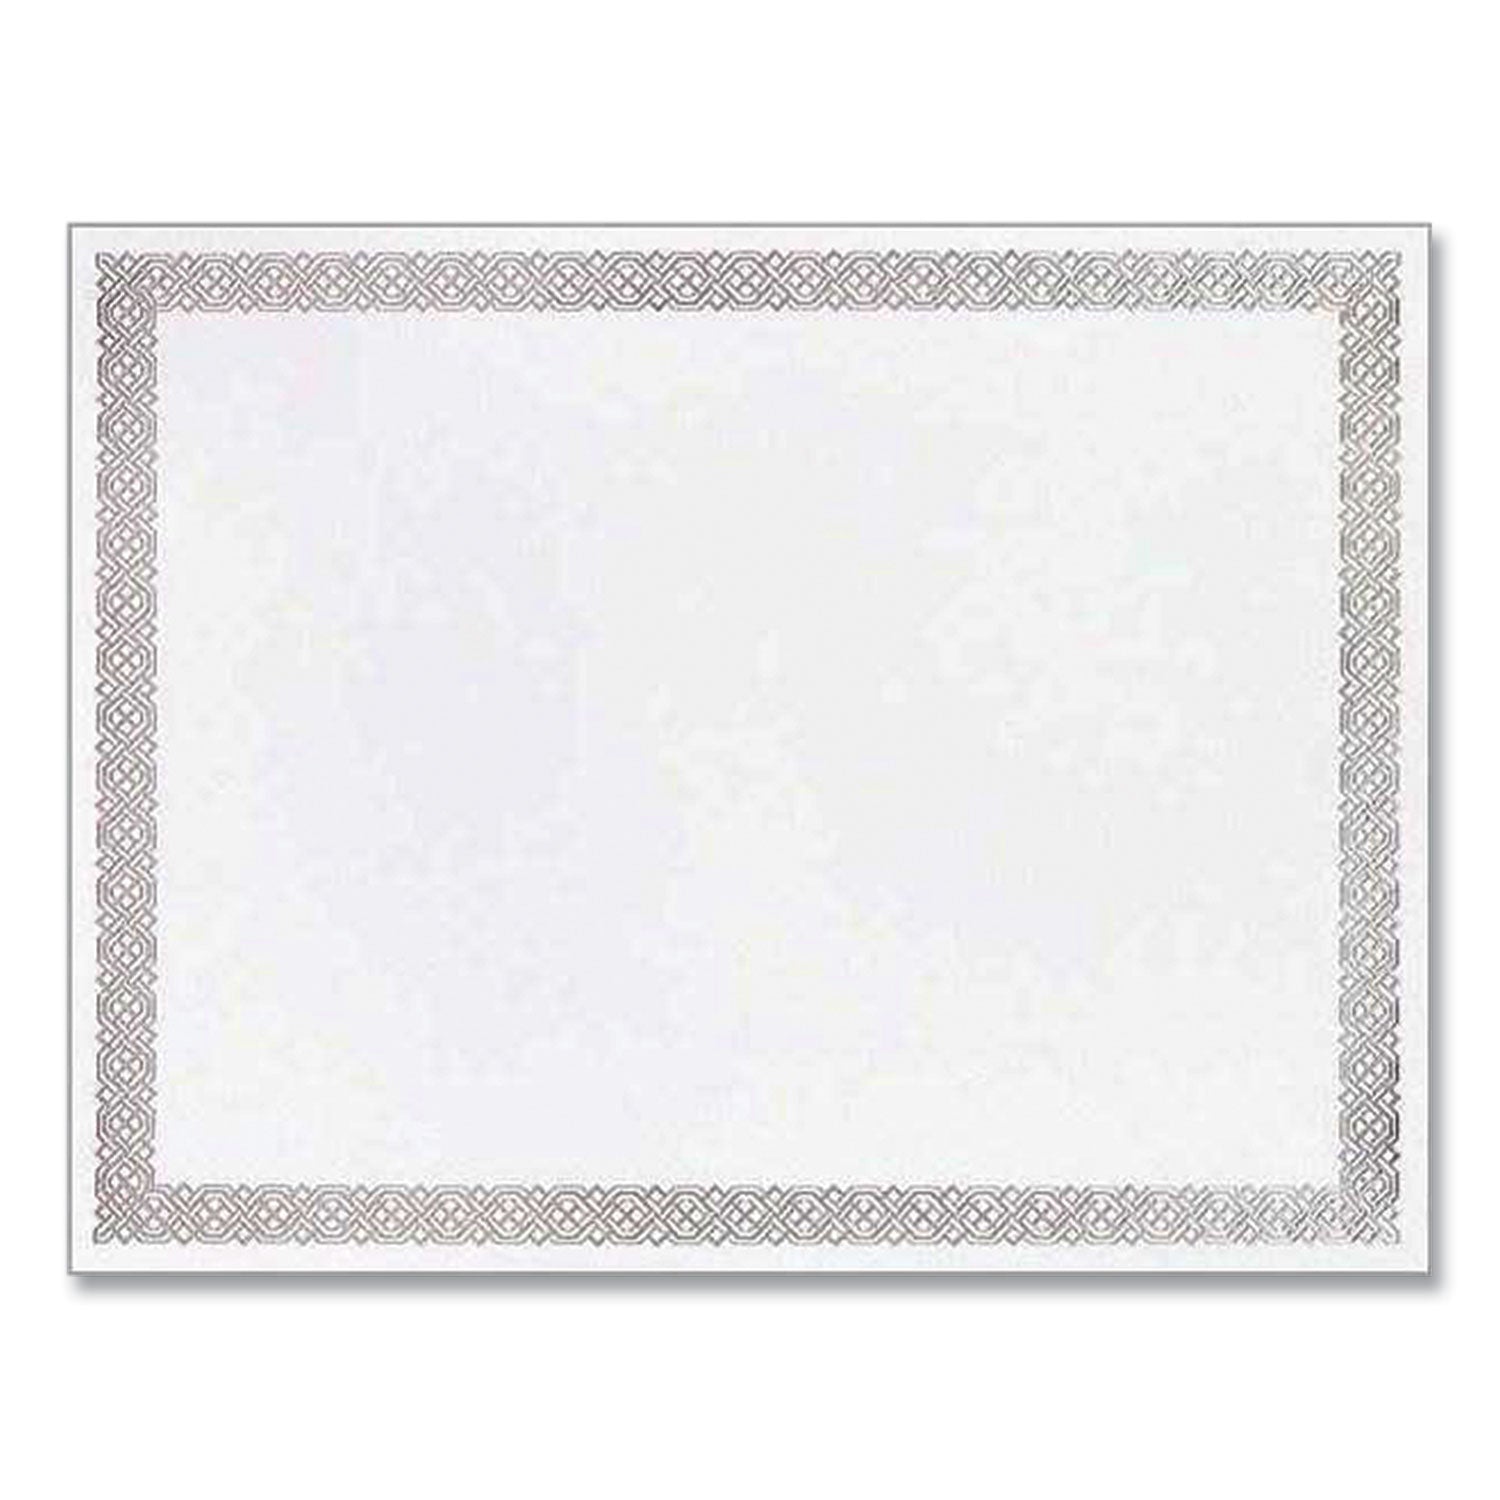 foil-border-certificates-85-x-11-ivory-silver-braided-with-silver-border-15-pack_grp963027s - 1